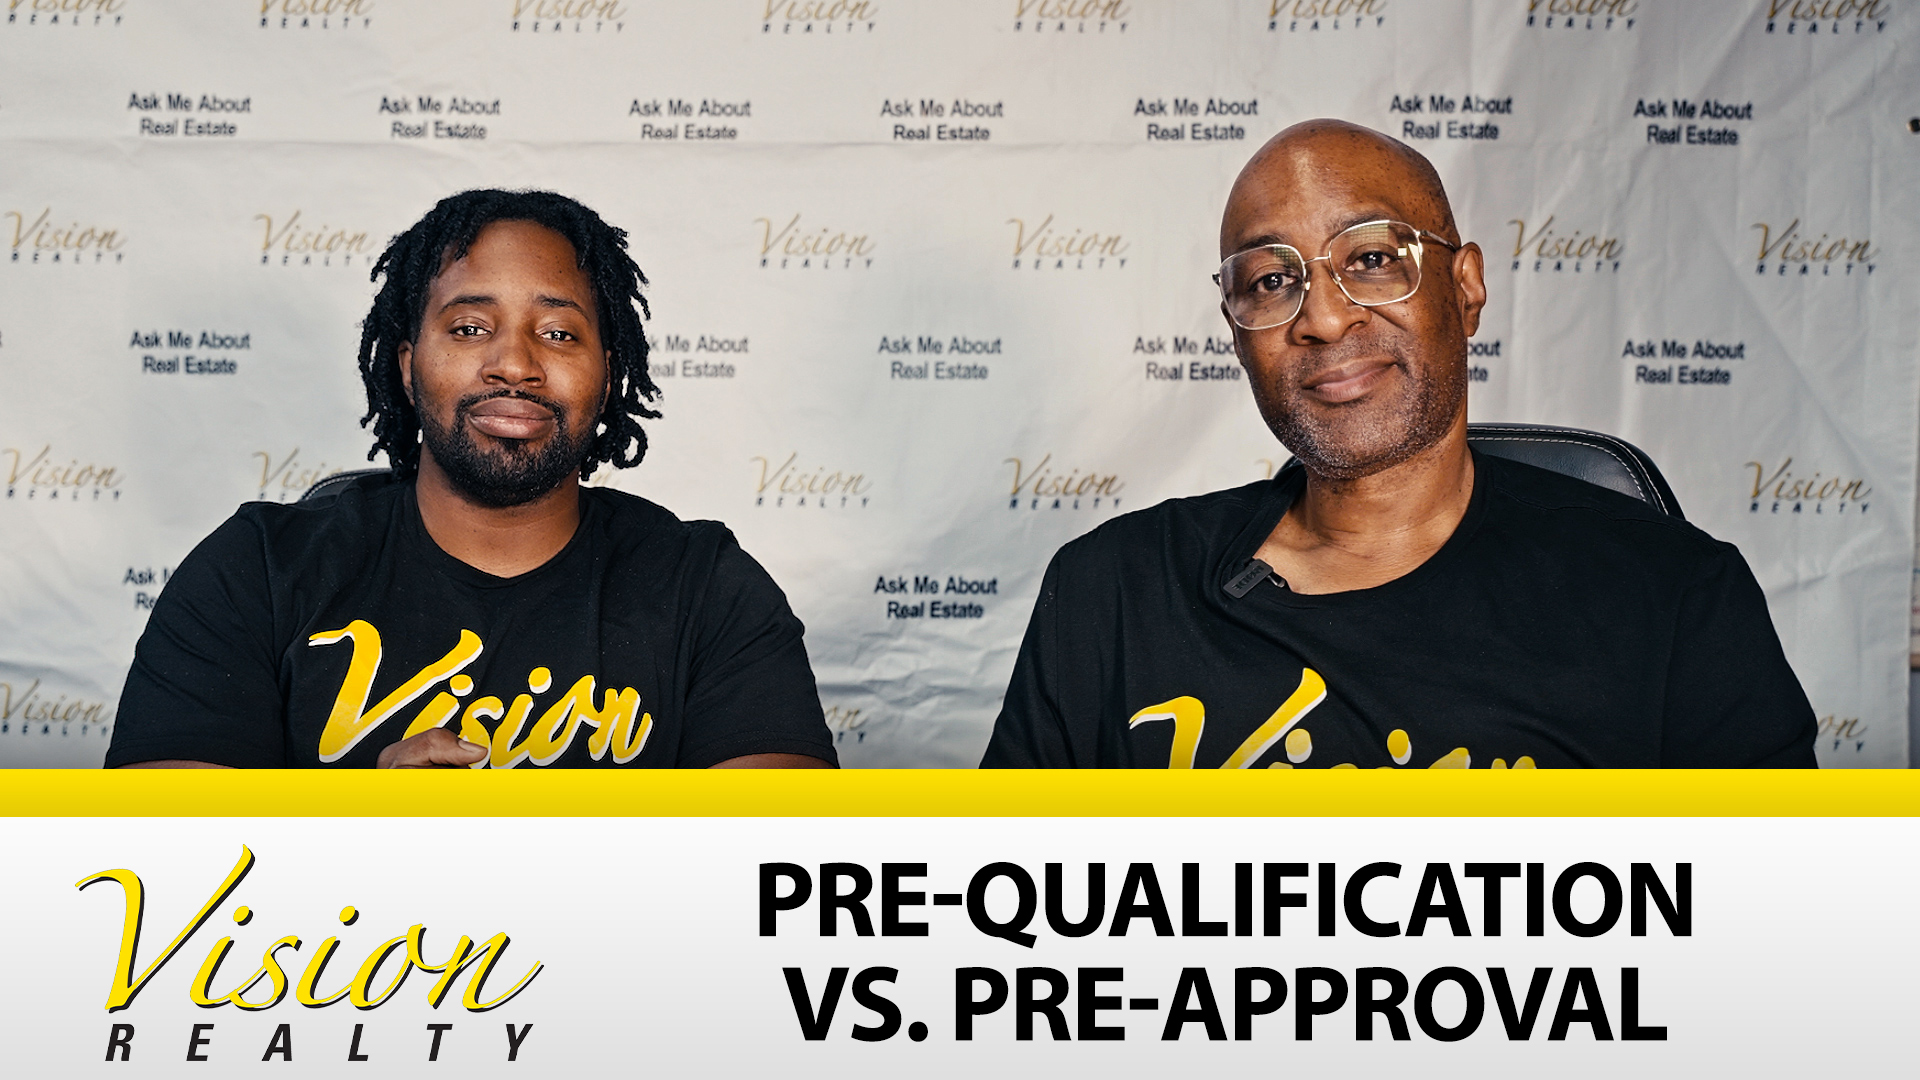 The Difference Between Pre-Qualification and Pre-Approval Made Simple